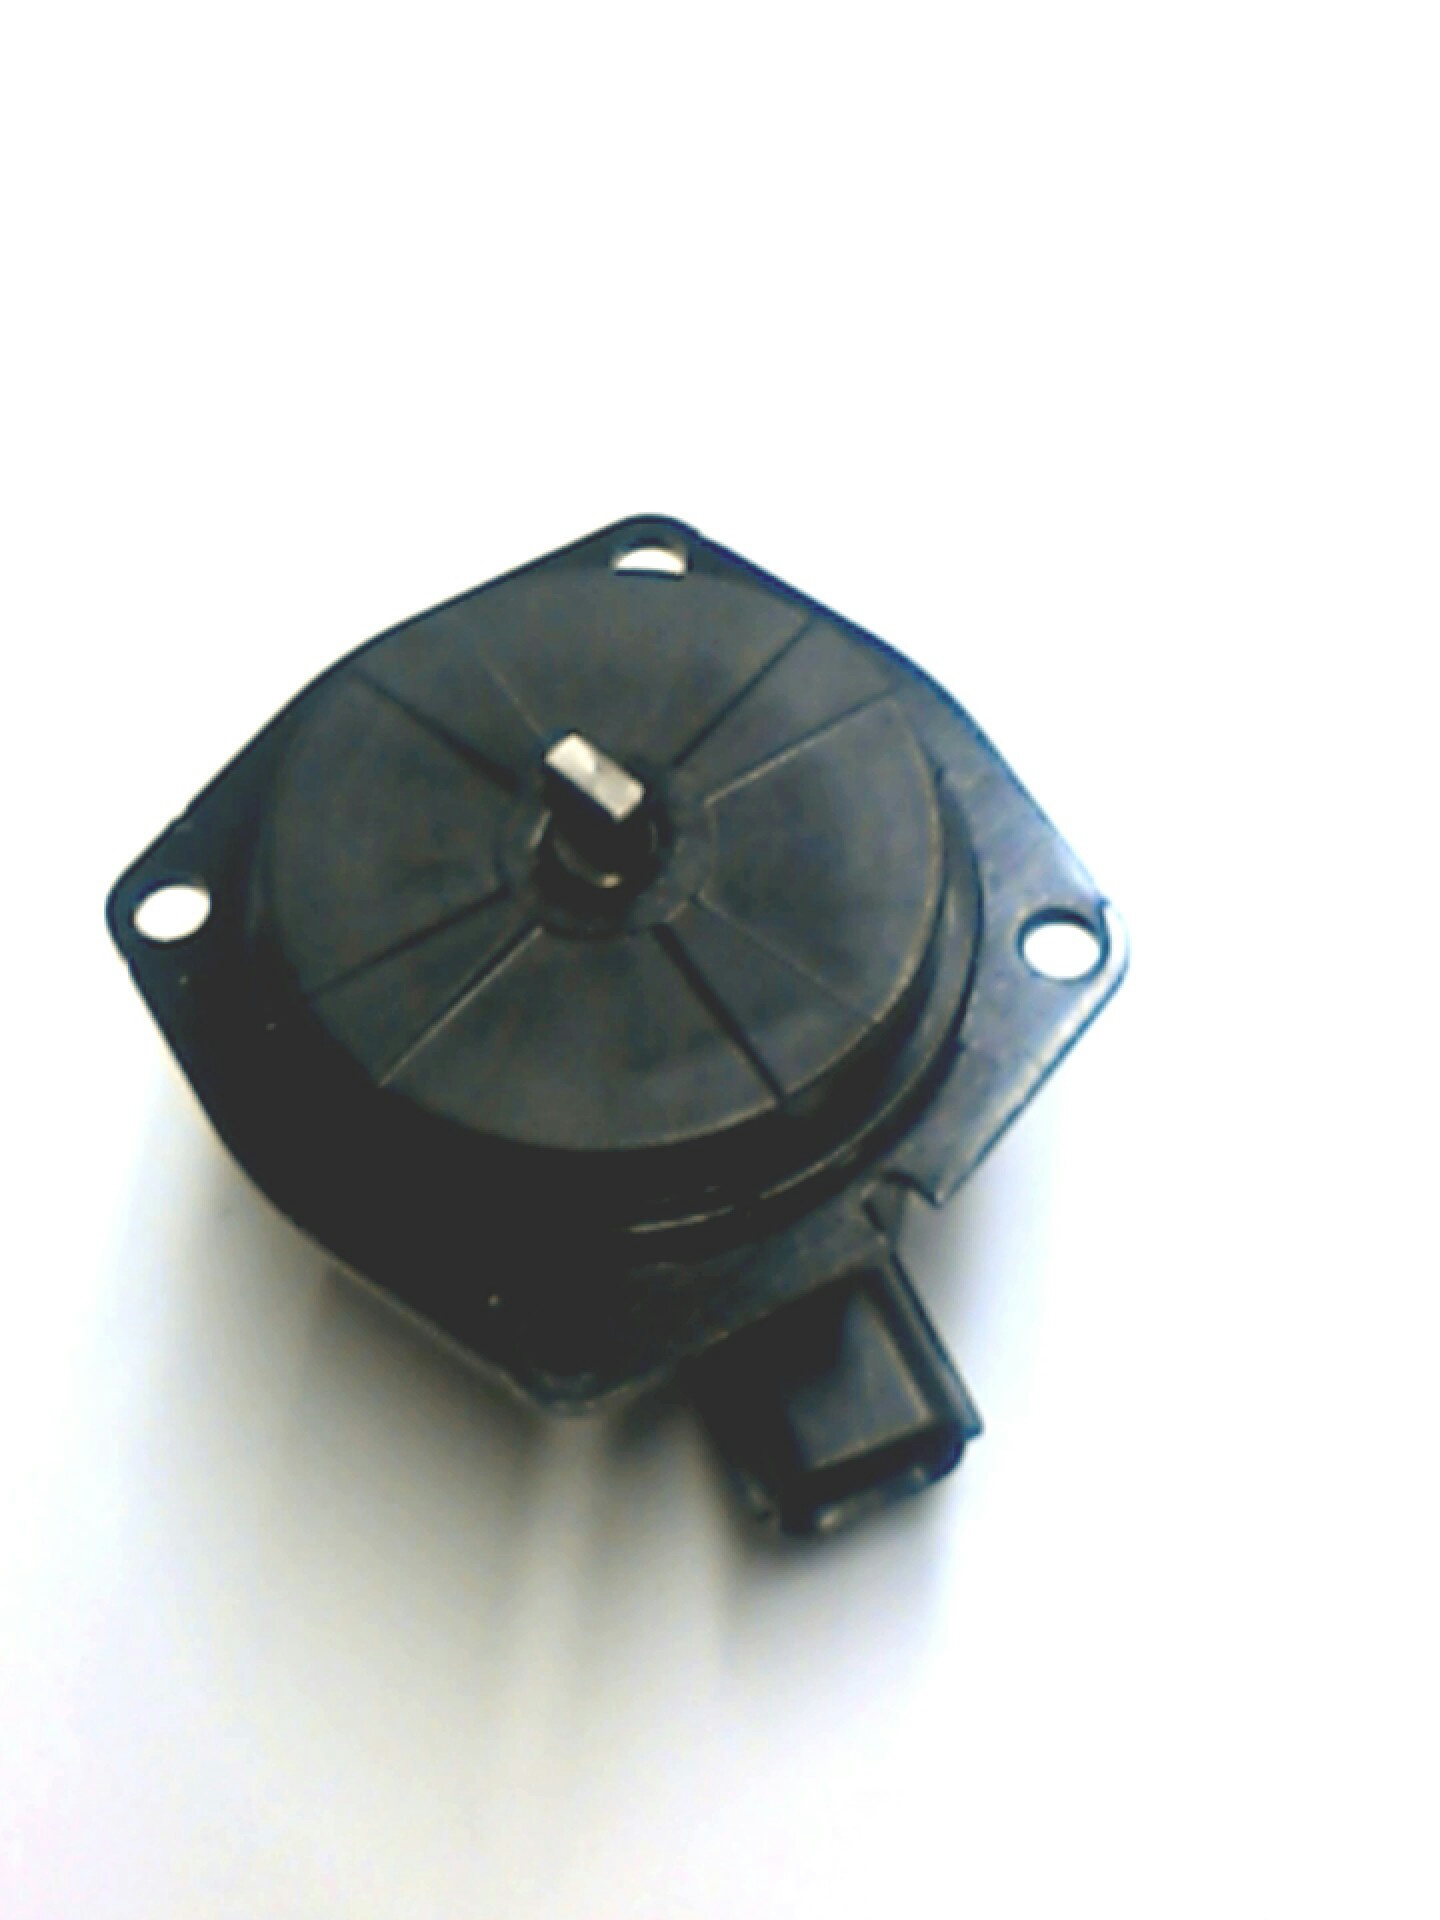 View 05149095AB ACTUATOR. INTAKE SHORT RUNNING VALVE.  Full-Sized Product Image